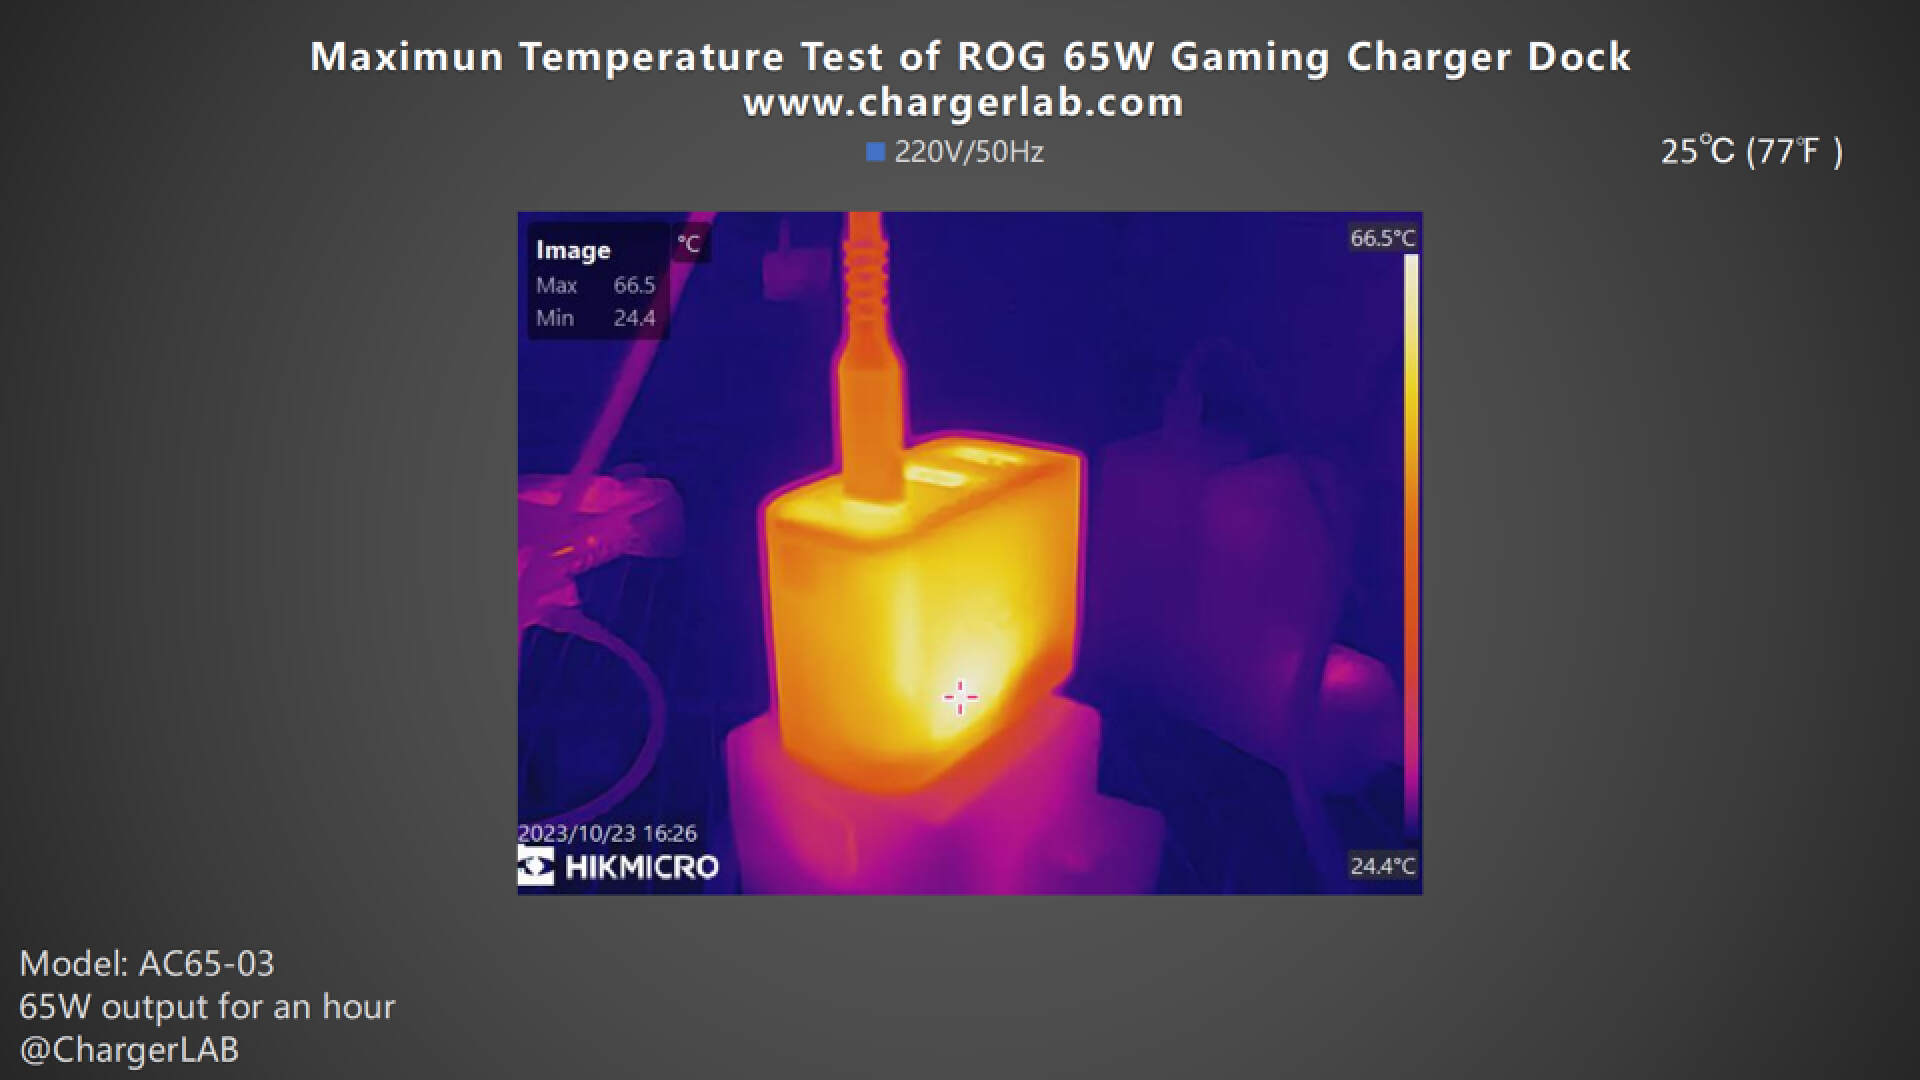 Charging Review of ASUS ROG 65W Gaming Charger Dock-Chargerlab